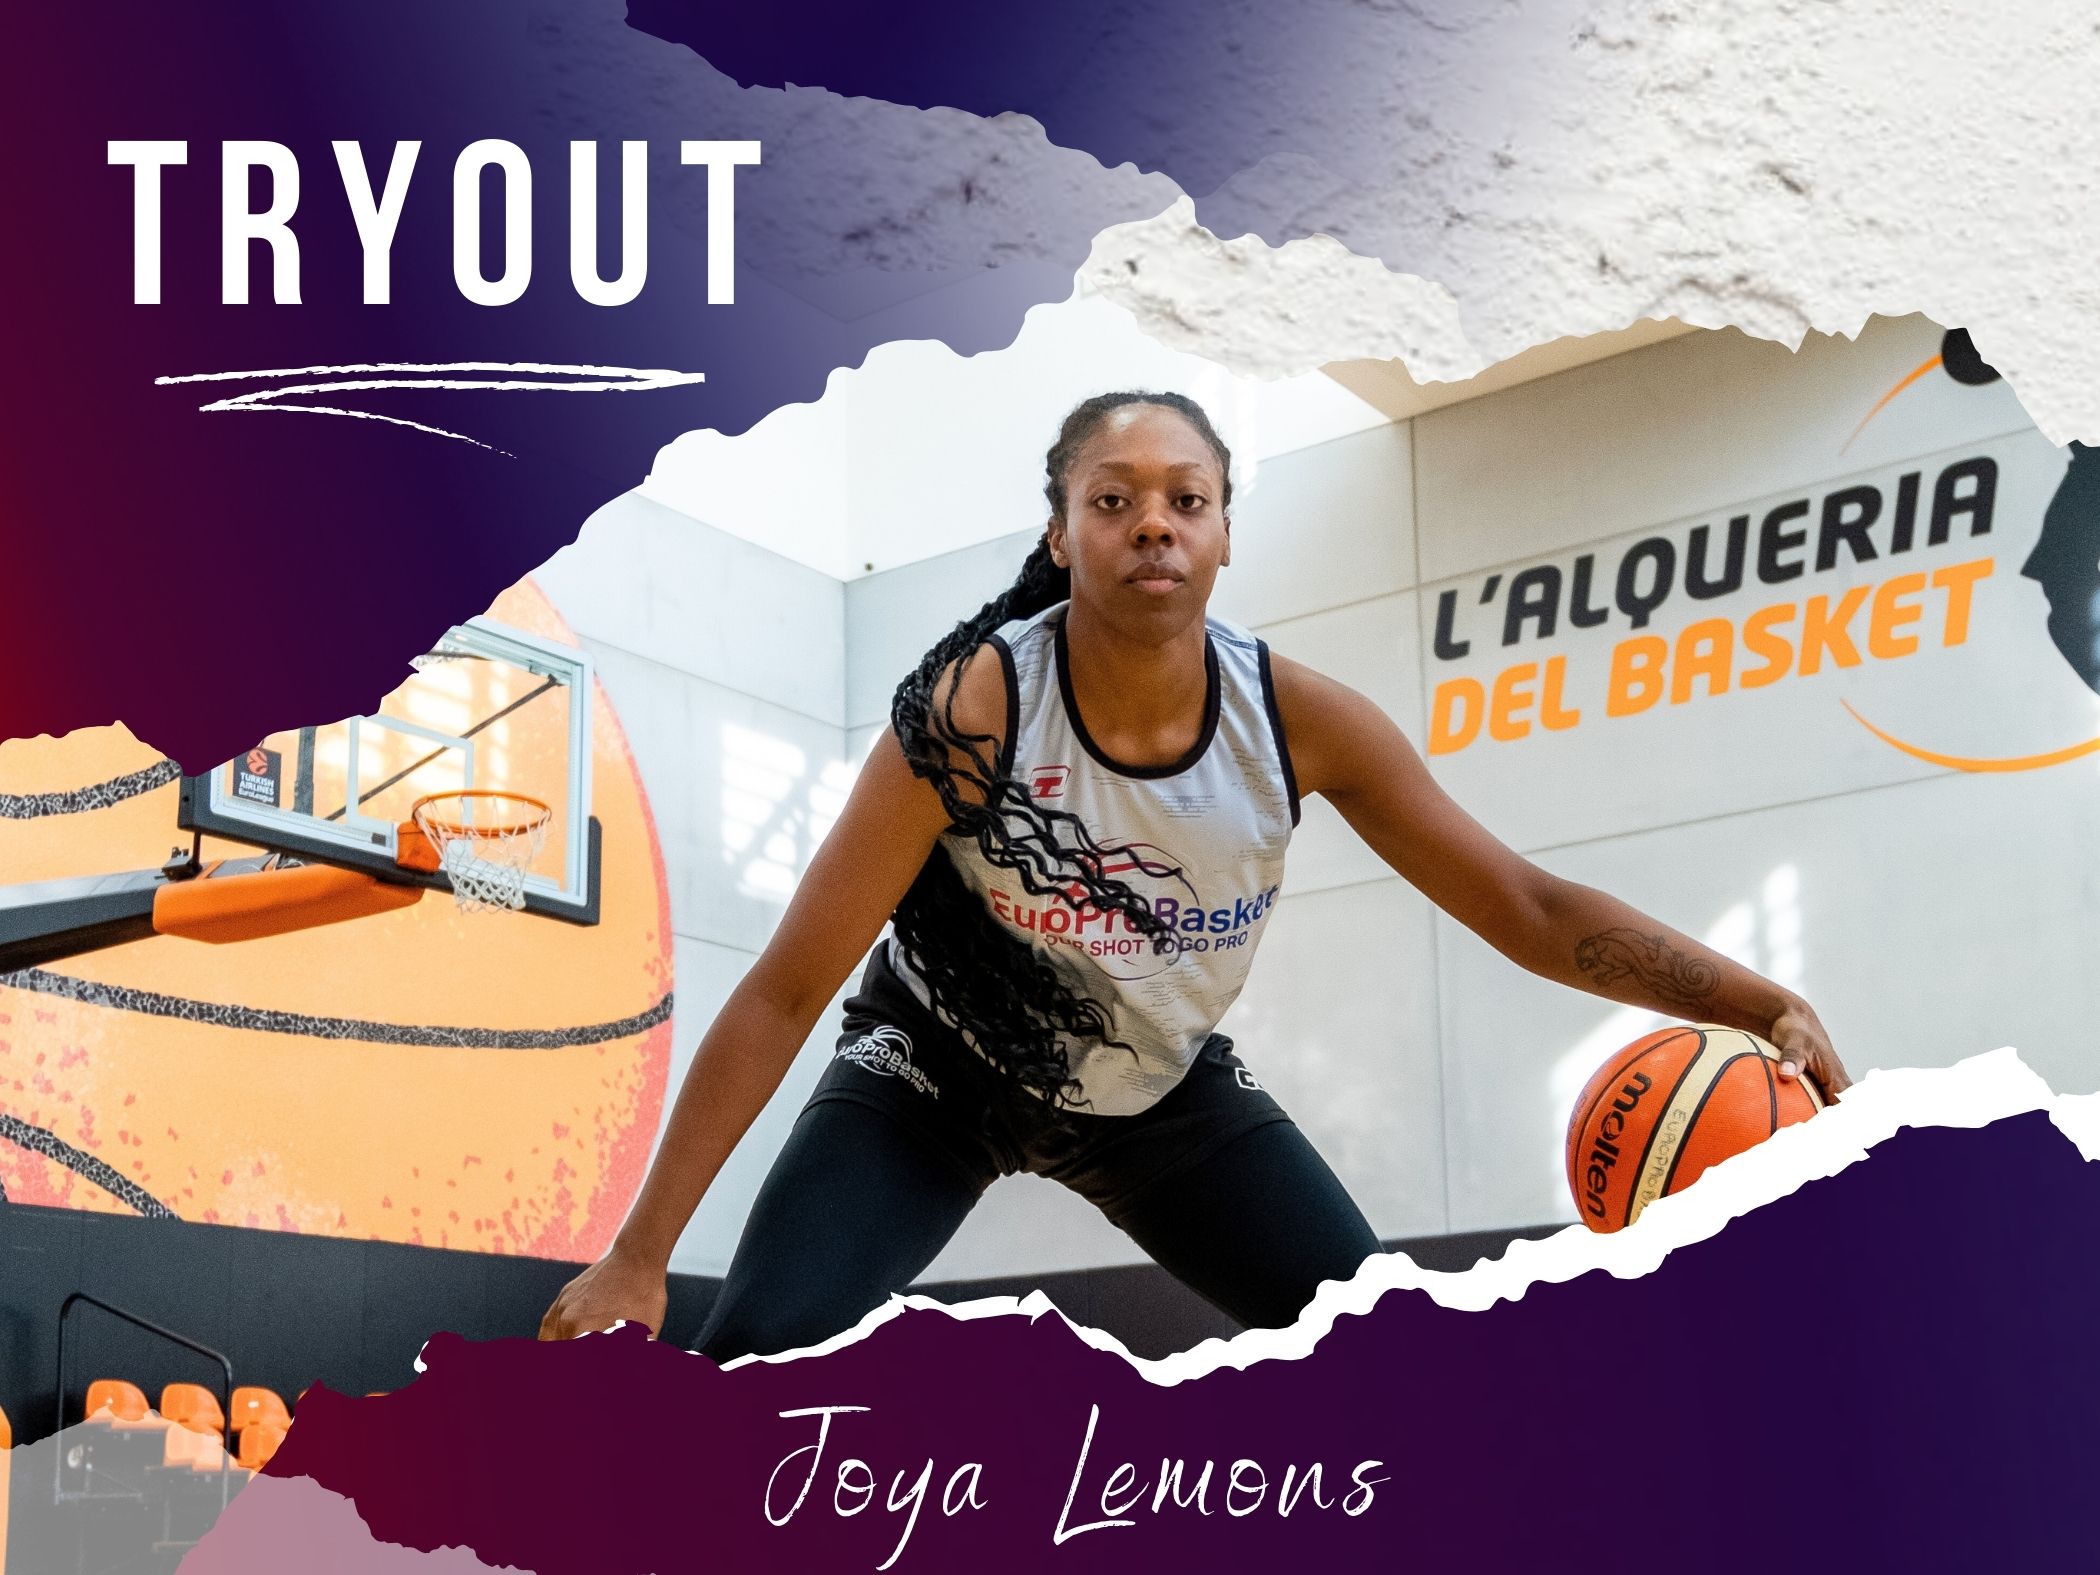 EuroProBasket Female Player on Tryout in Portugal